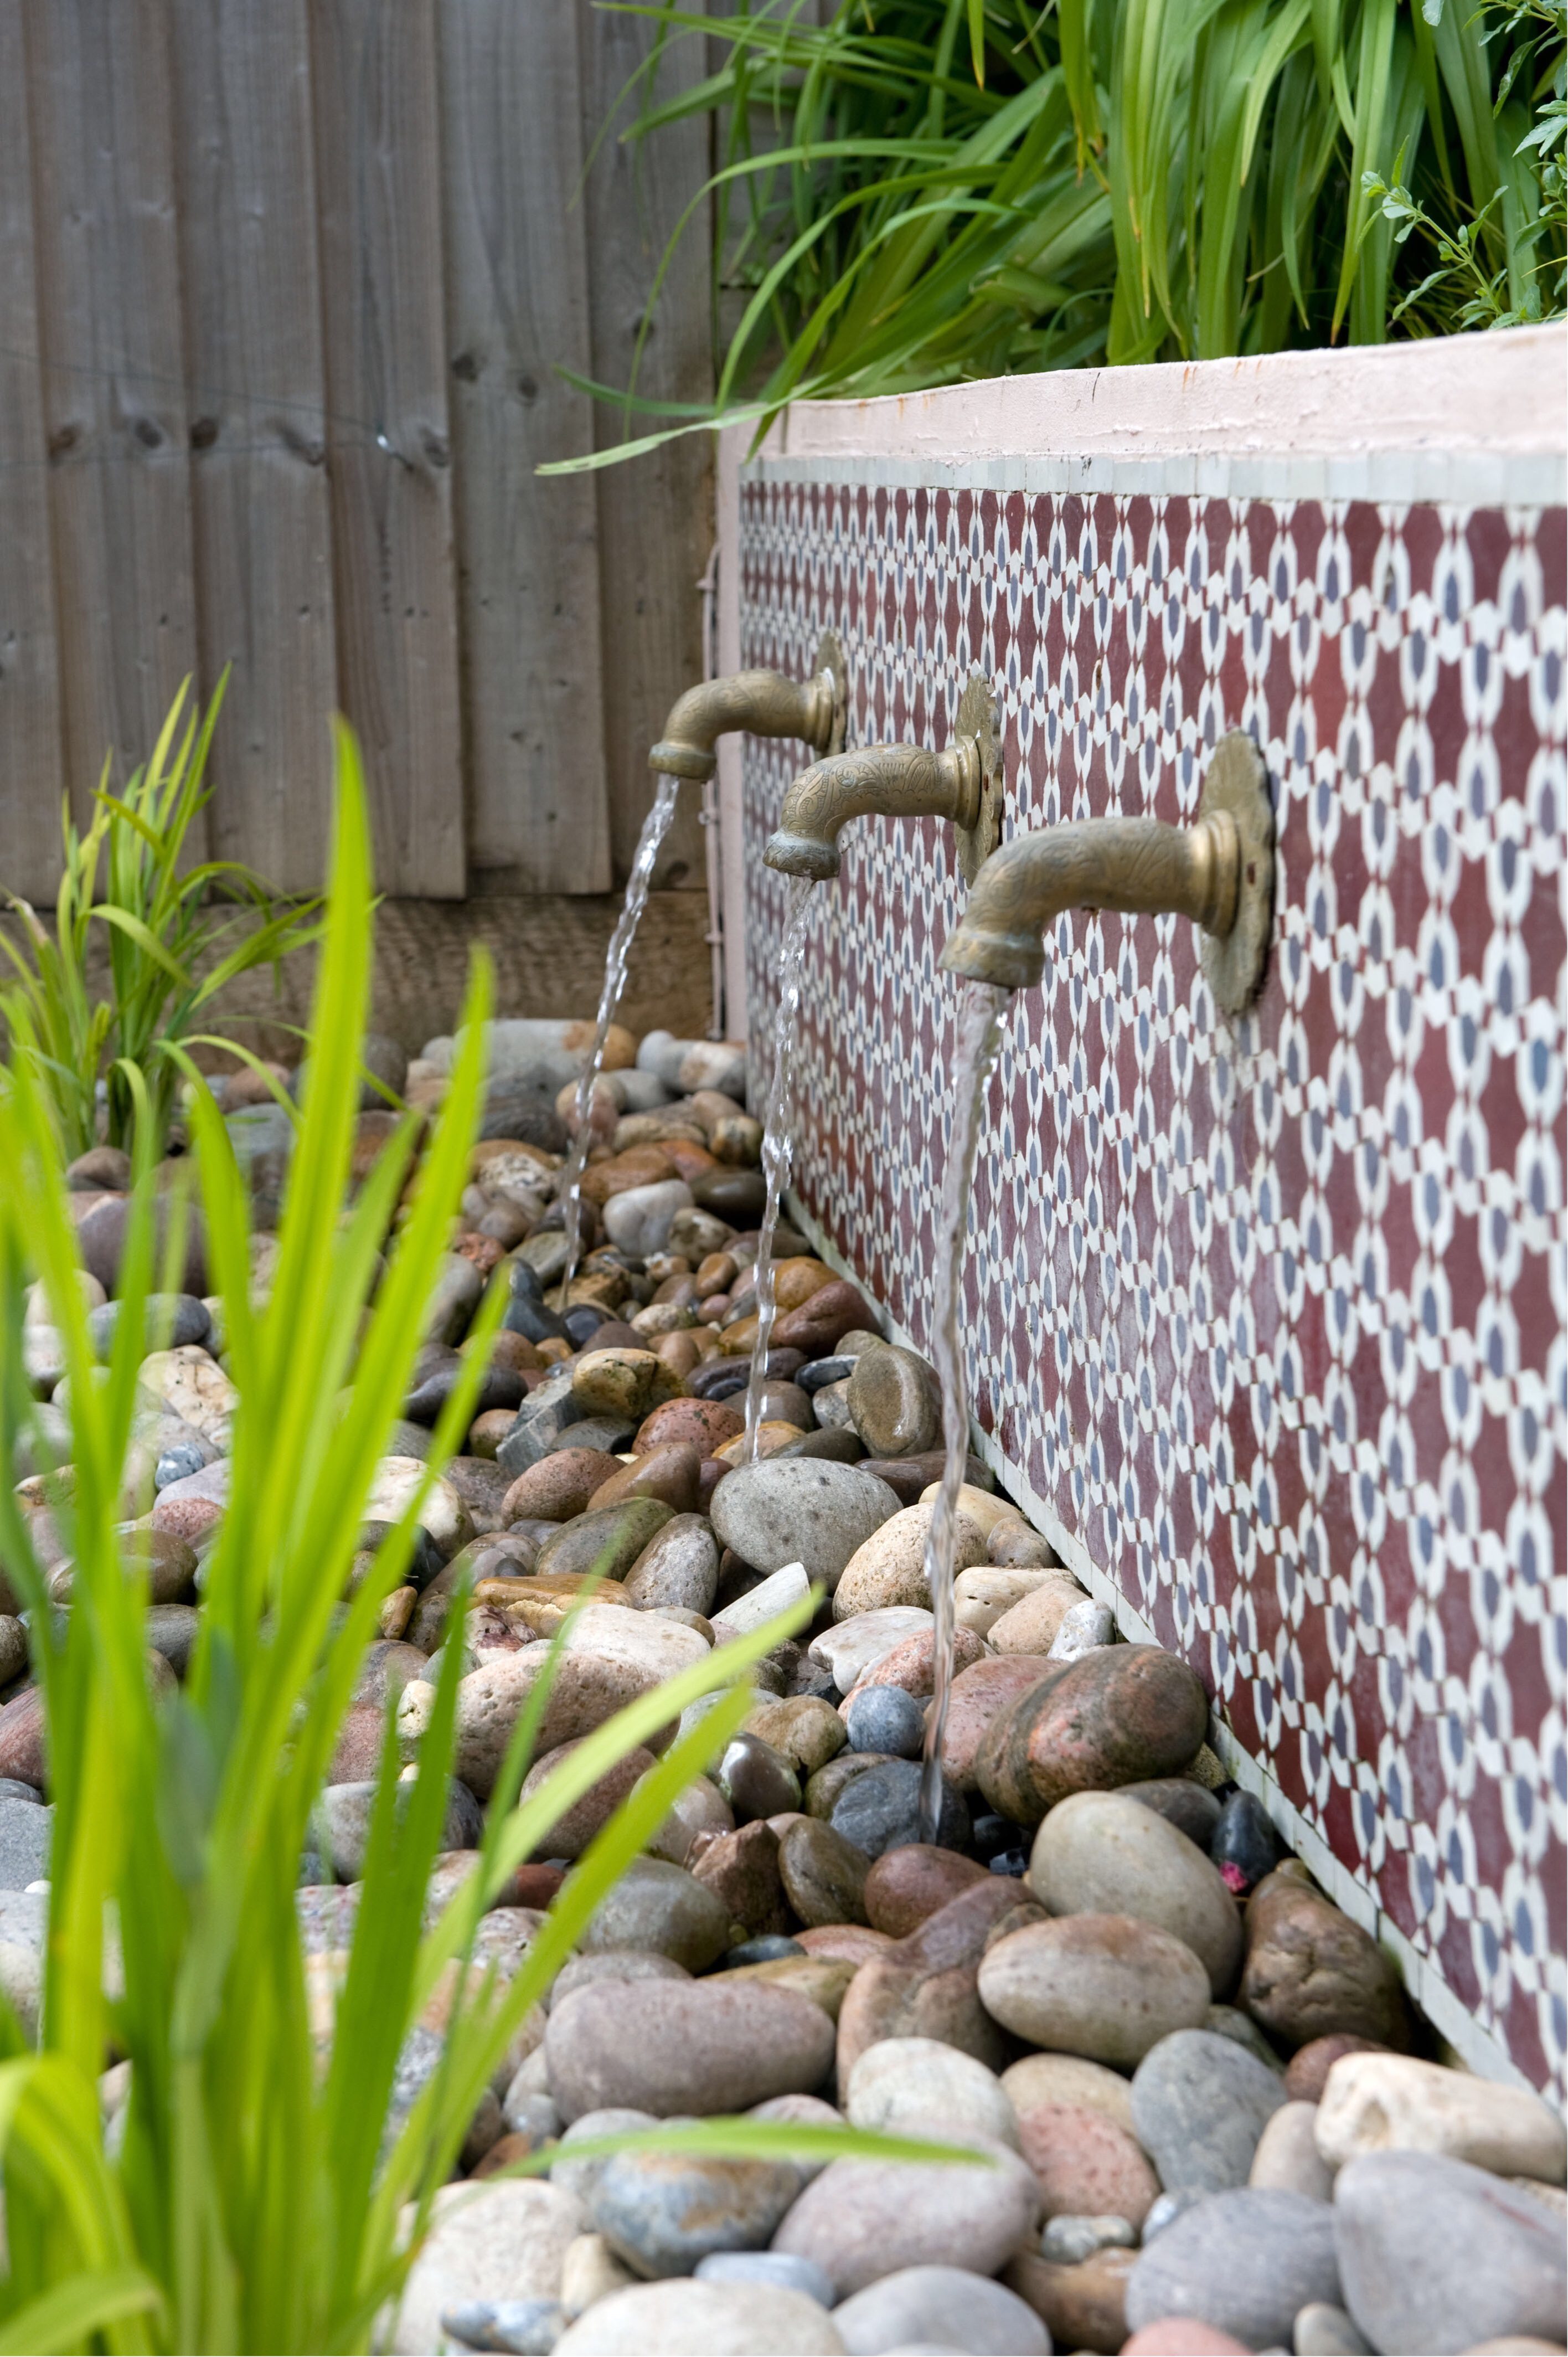 Garden water feature design tips - wall mounted ones are popular